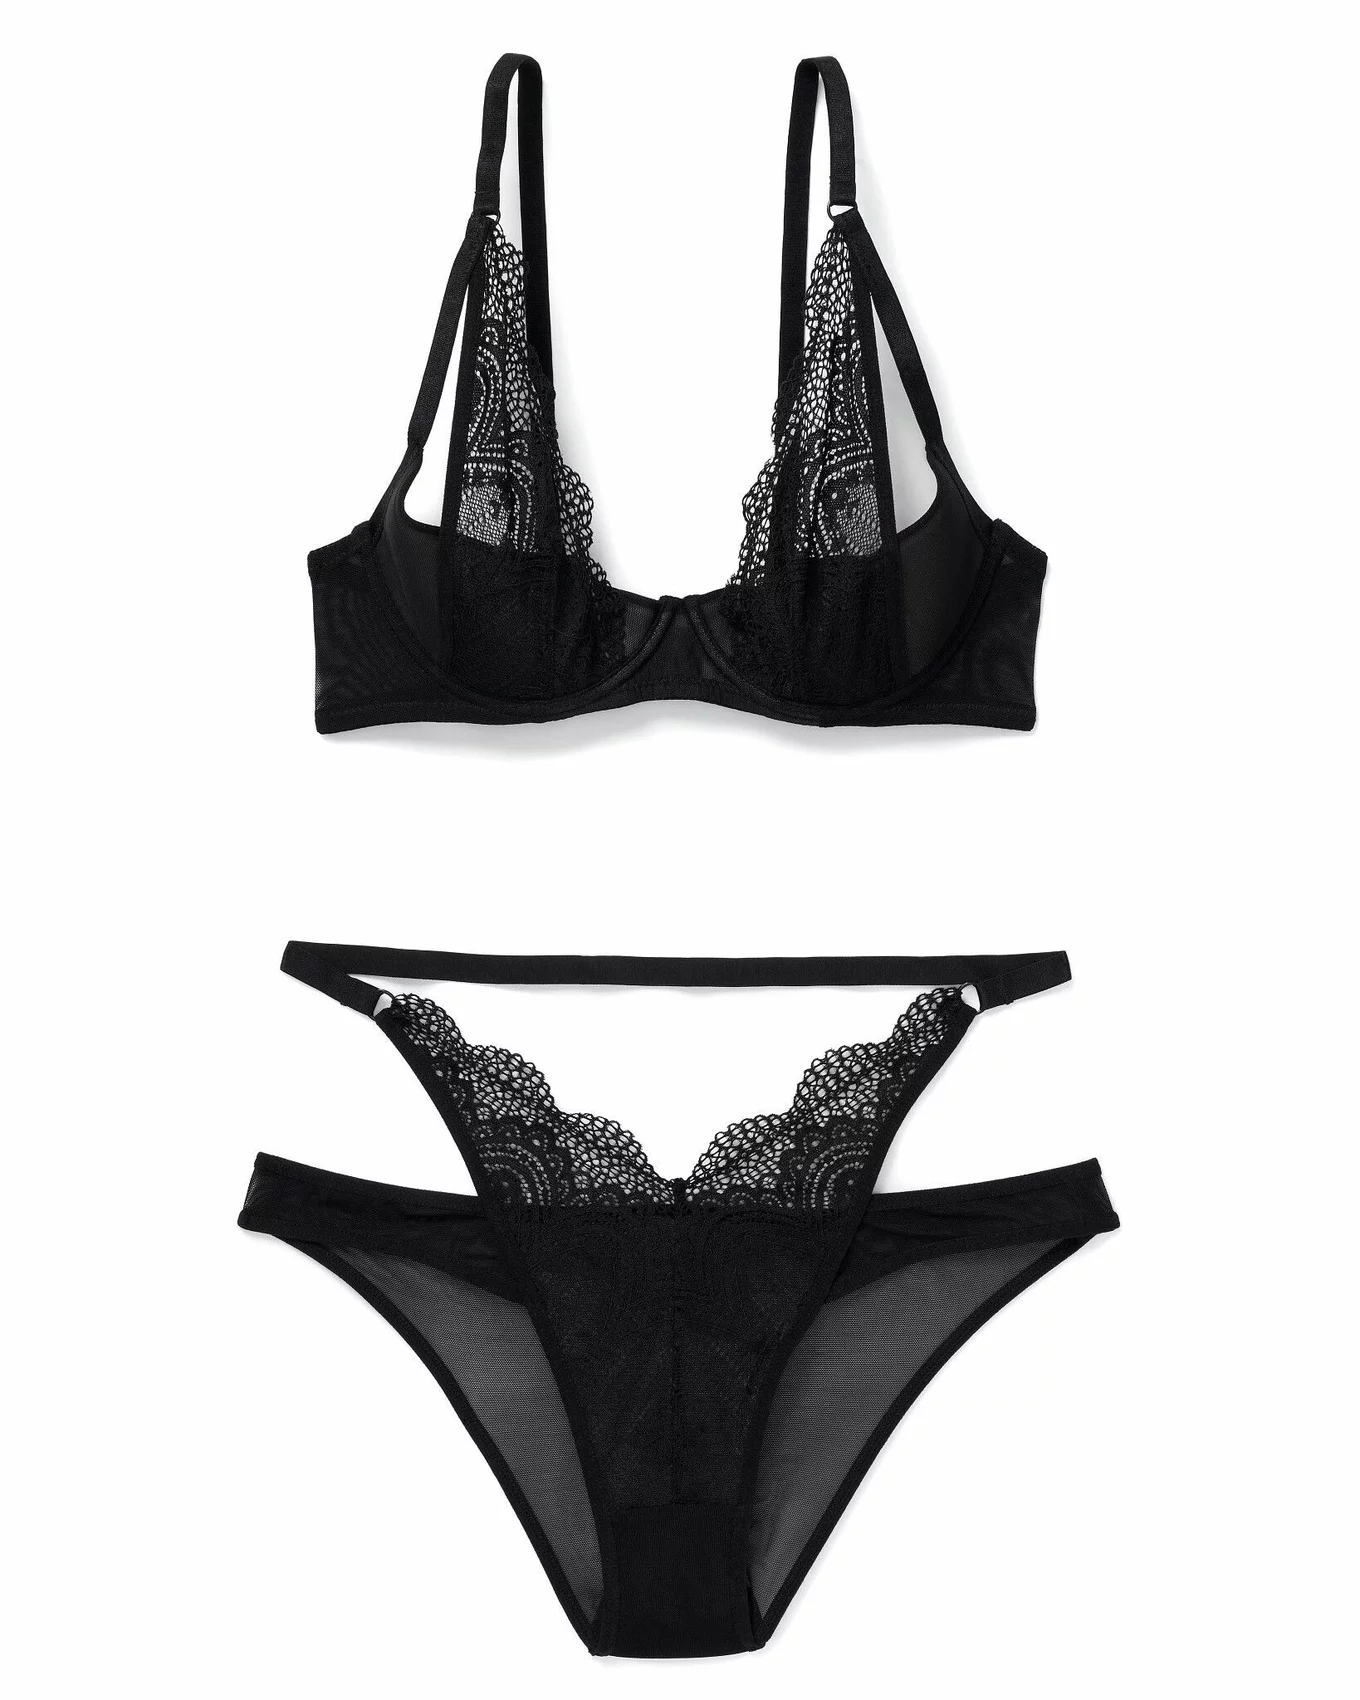 Plus Size Women's Black Lingerie Set With Scallop Edge, Bra And